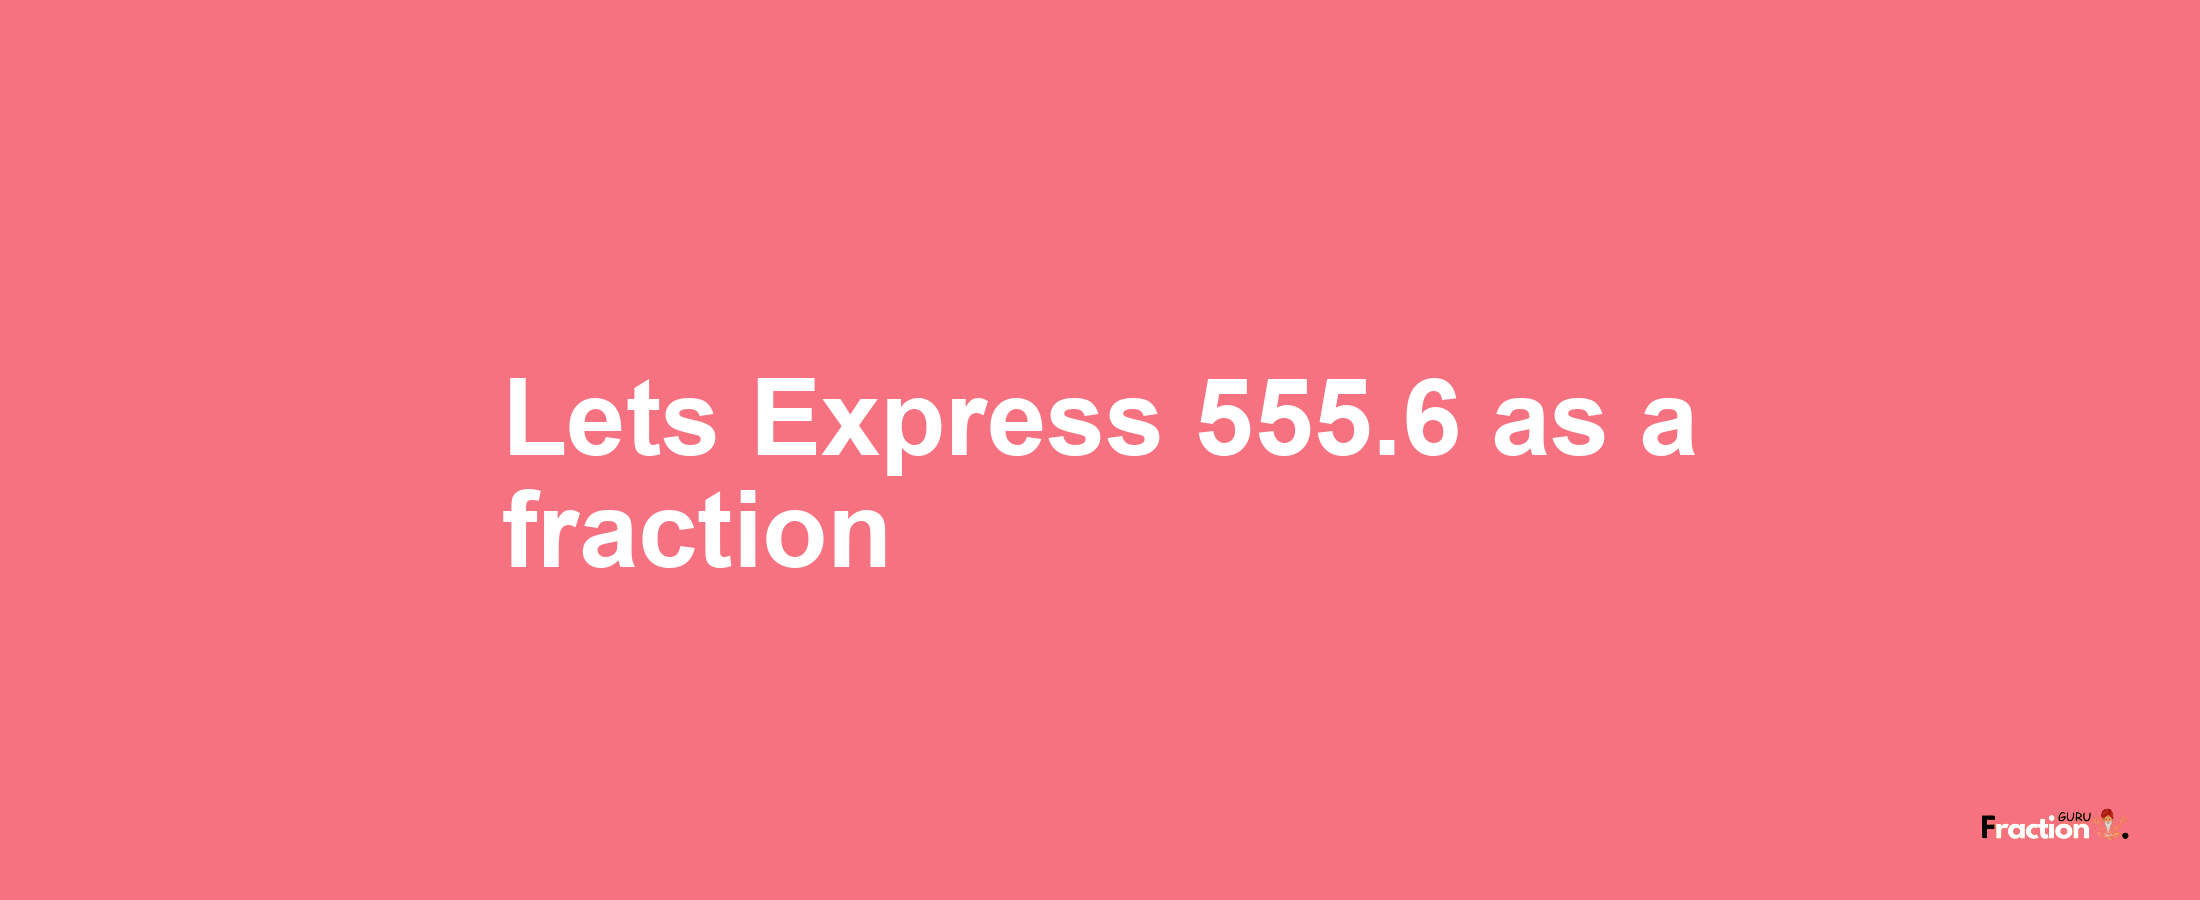 Lets Express 555.6 as afraction